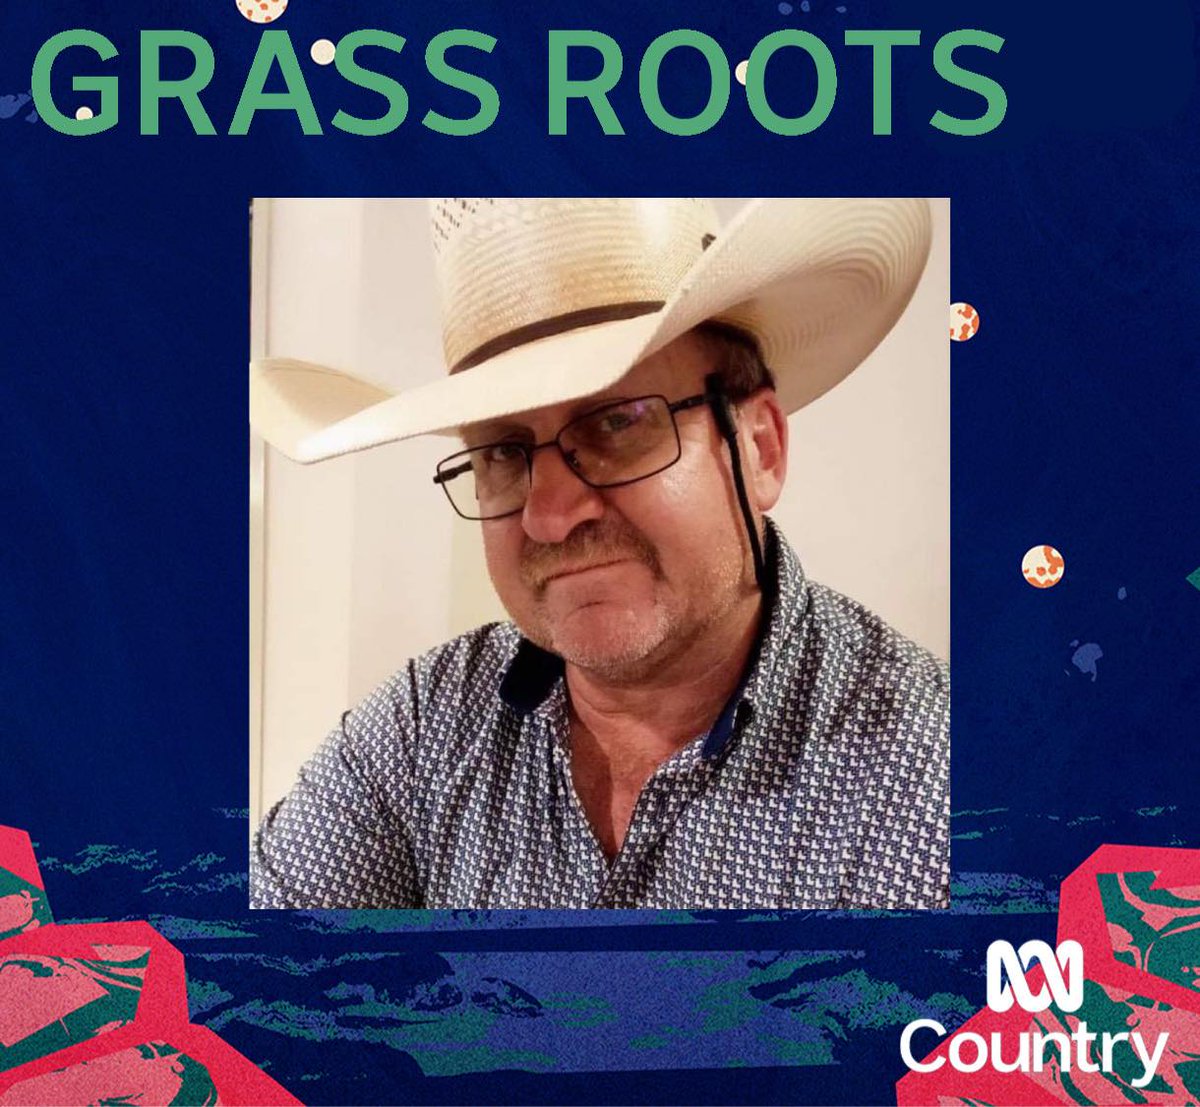 Excited to have my latest single, 'Only A Cowgirl' on the Australian Country national radio programme on ABC called GRASS ROOTS week commencing April 22nd.
 “Listen from anywhere in the world, online or via the ABC Listen APP”.
Premiere air-time
MONDAY at 9pm AEDT
#abccountry